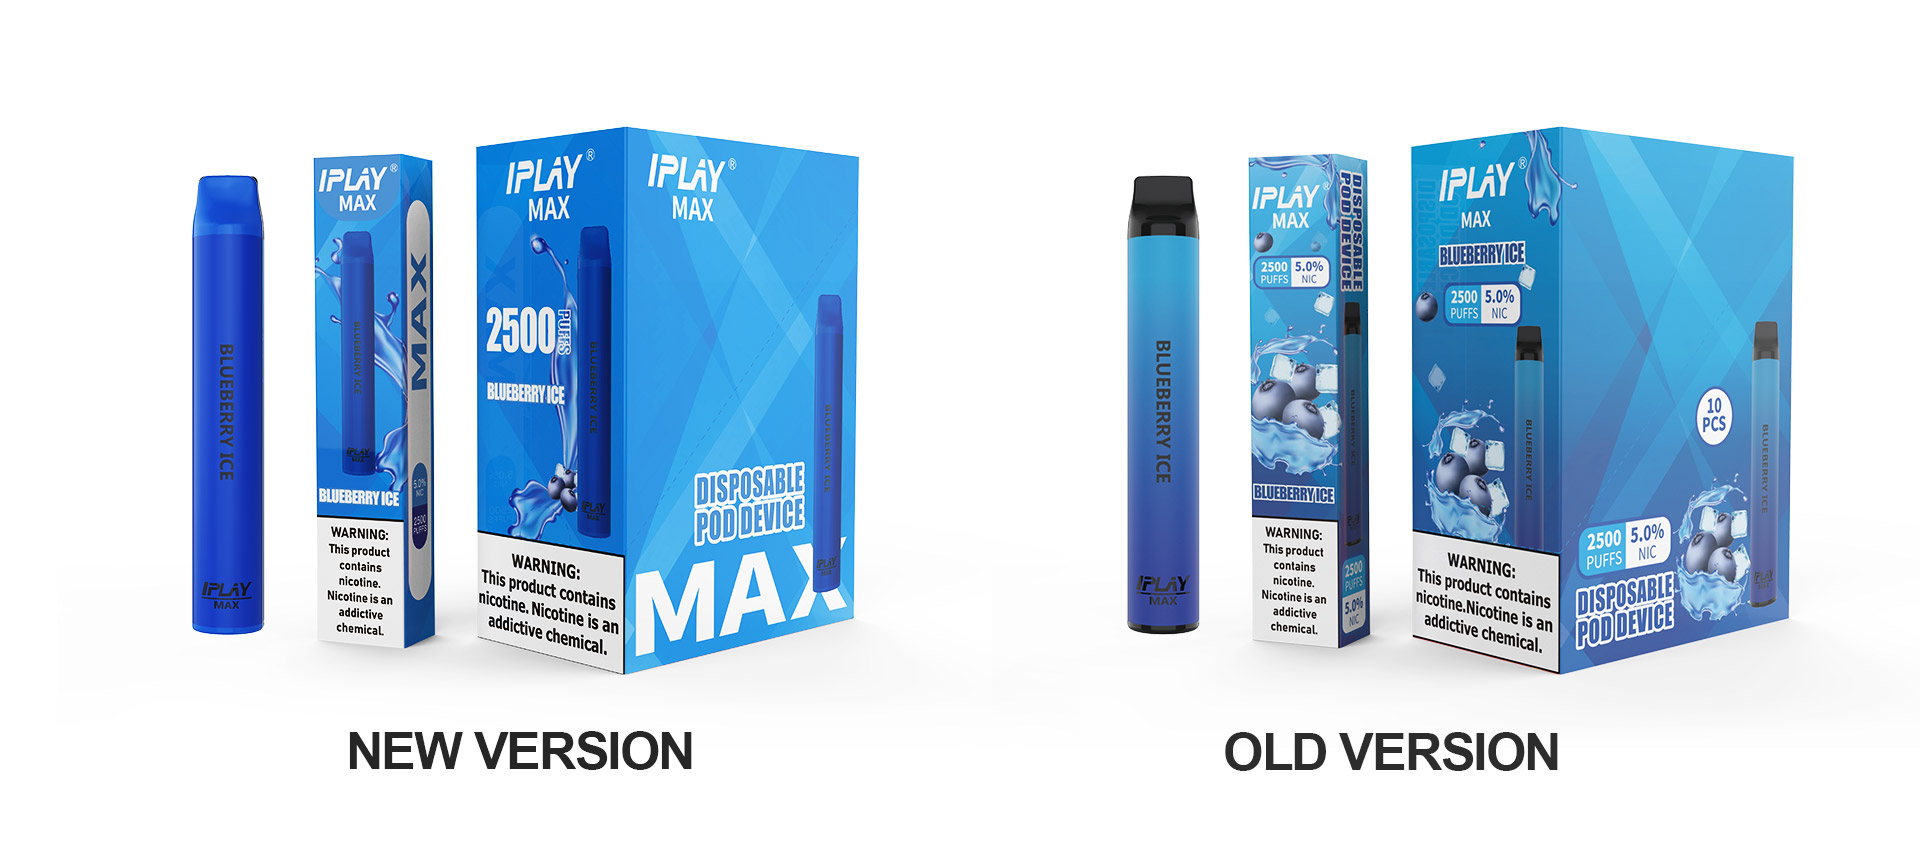 IPLAY MAX 2500 NEW VERSION - PACKAGE